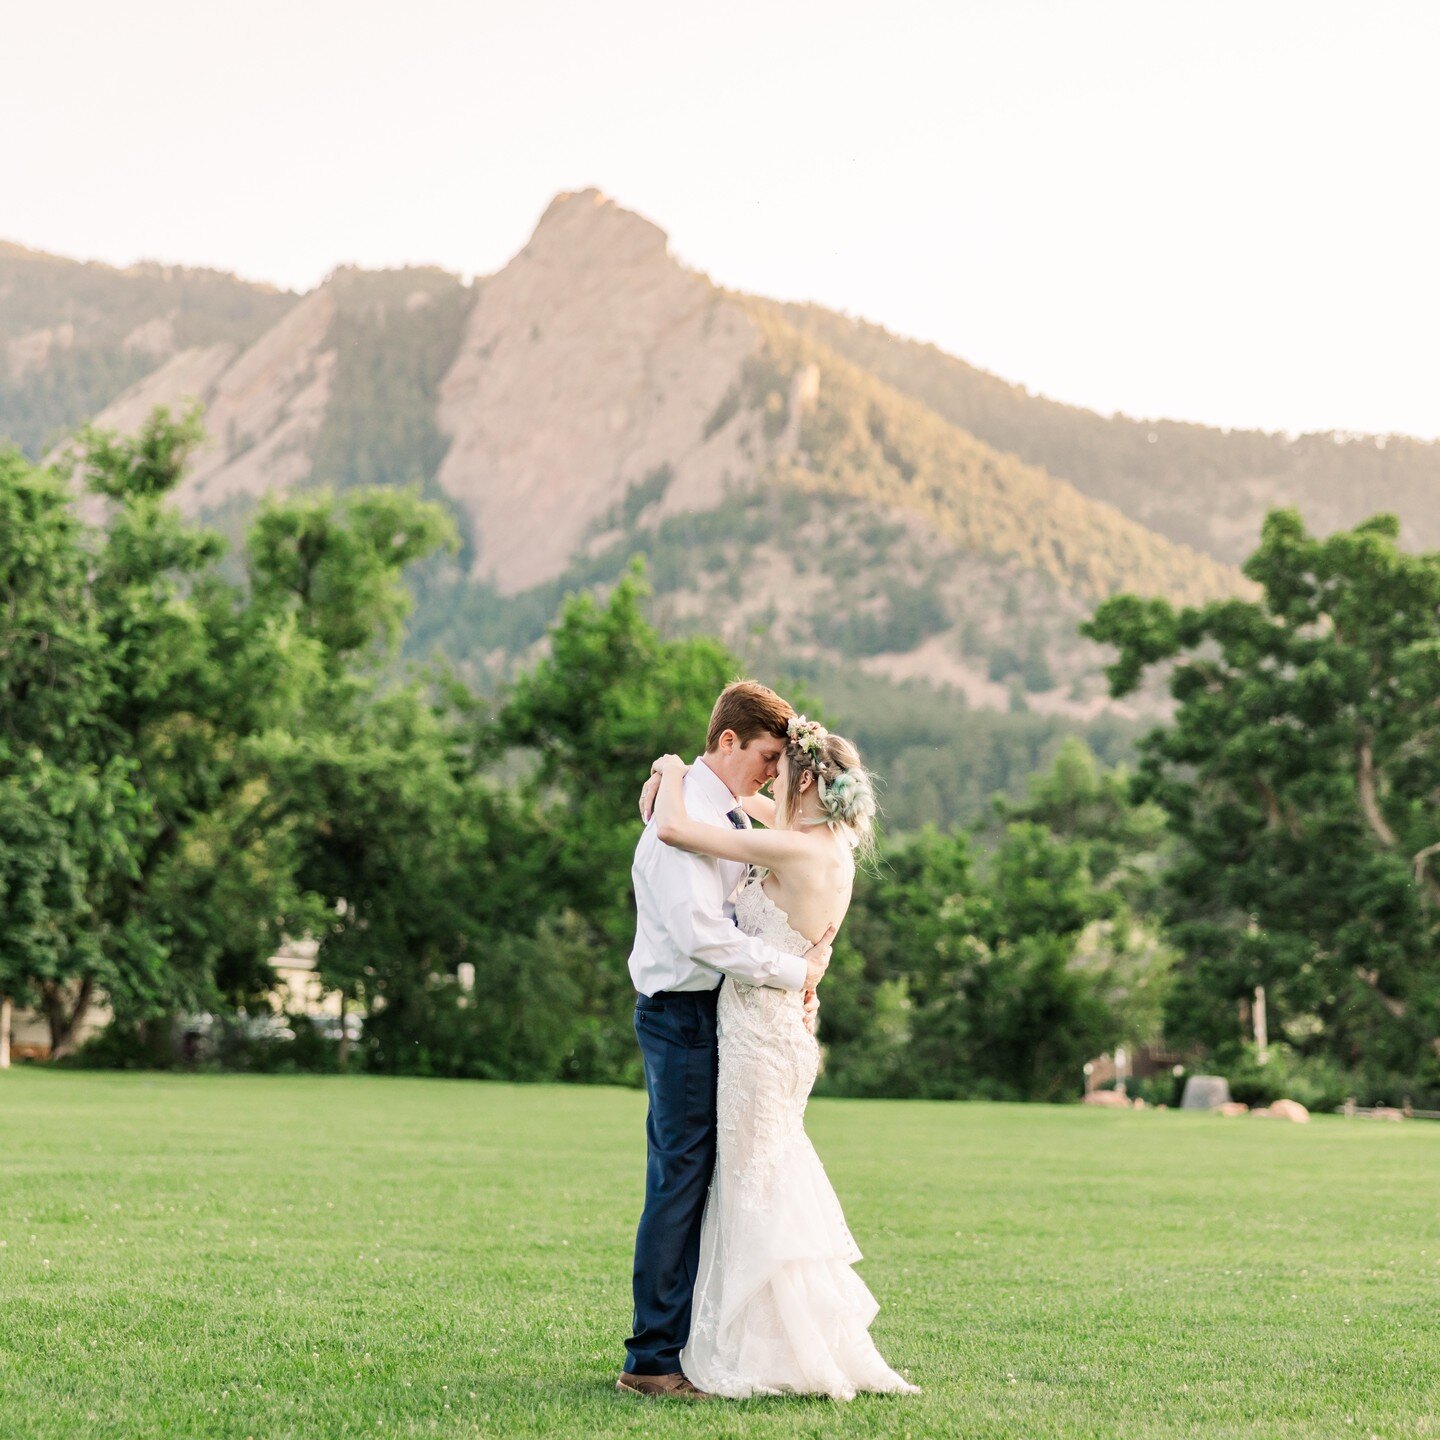 Aubrey and John had a gooooogeous day in Boulder, even with the 90+ temps!! 

They got married on the lawn at Chautauqua Dining Hall, which was a perfect place for them after going to CU Boulder.

We also met up the day after their wedding for an adv